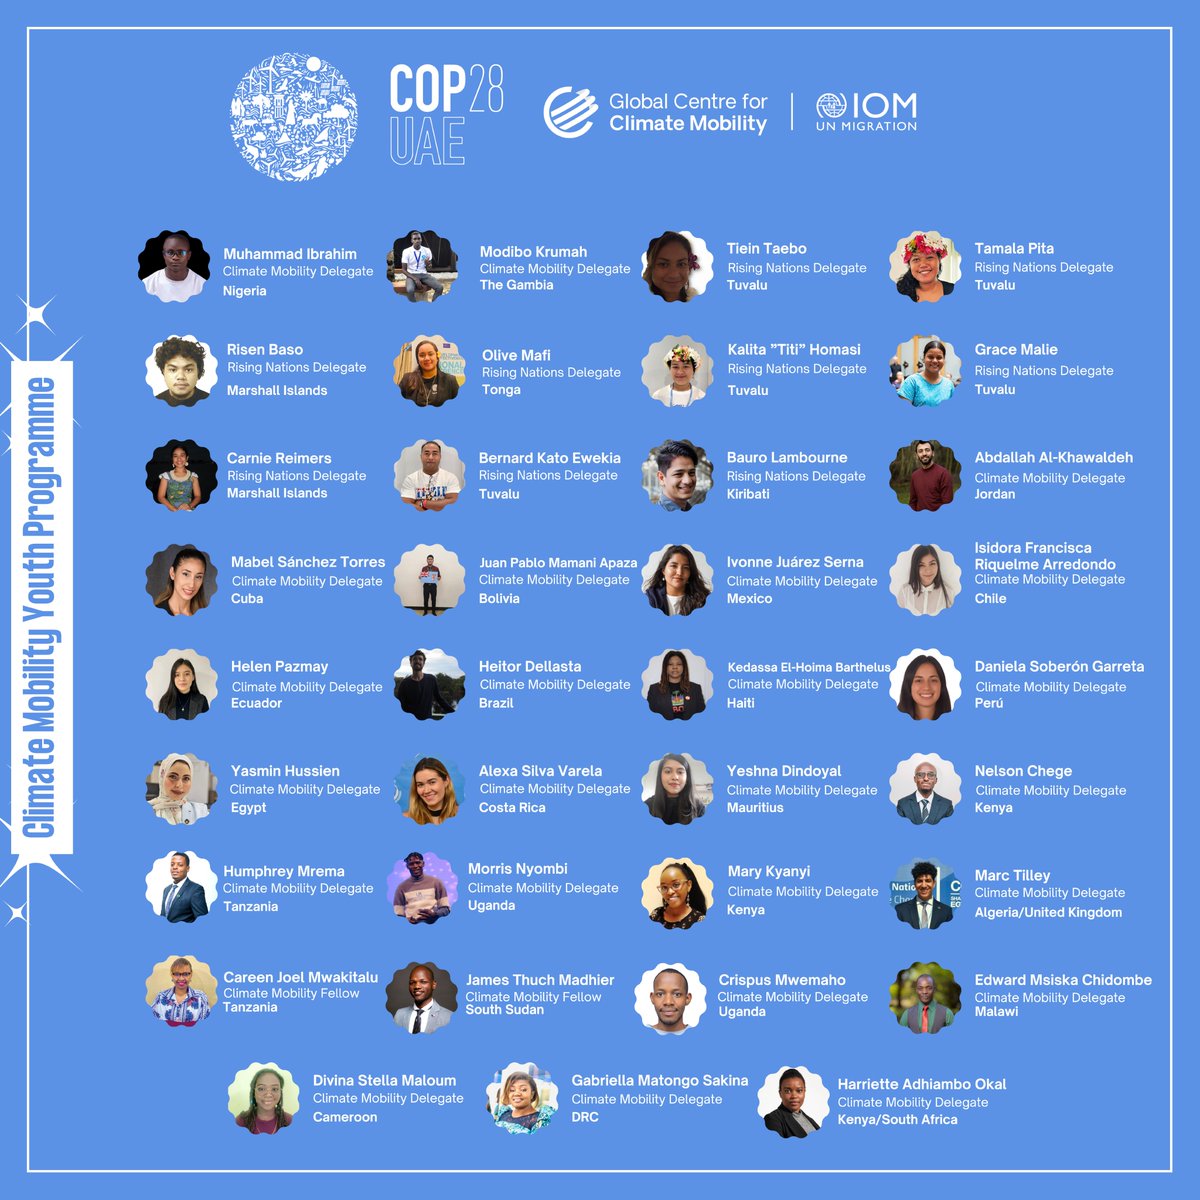 🎉 Exciting news! Over 5450 young leaders applied to the #ClimateMobility Youth Programme for #COP28, showing incredible dedication to addressing climate mobility. A huge thanks to all applicants for their inspiring stories and commitment!

🌟 We're thrilled to announce this…